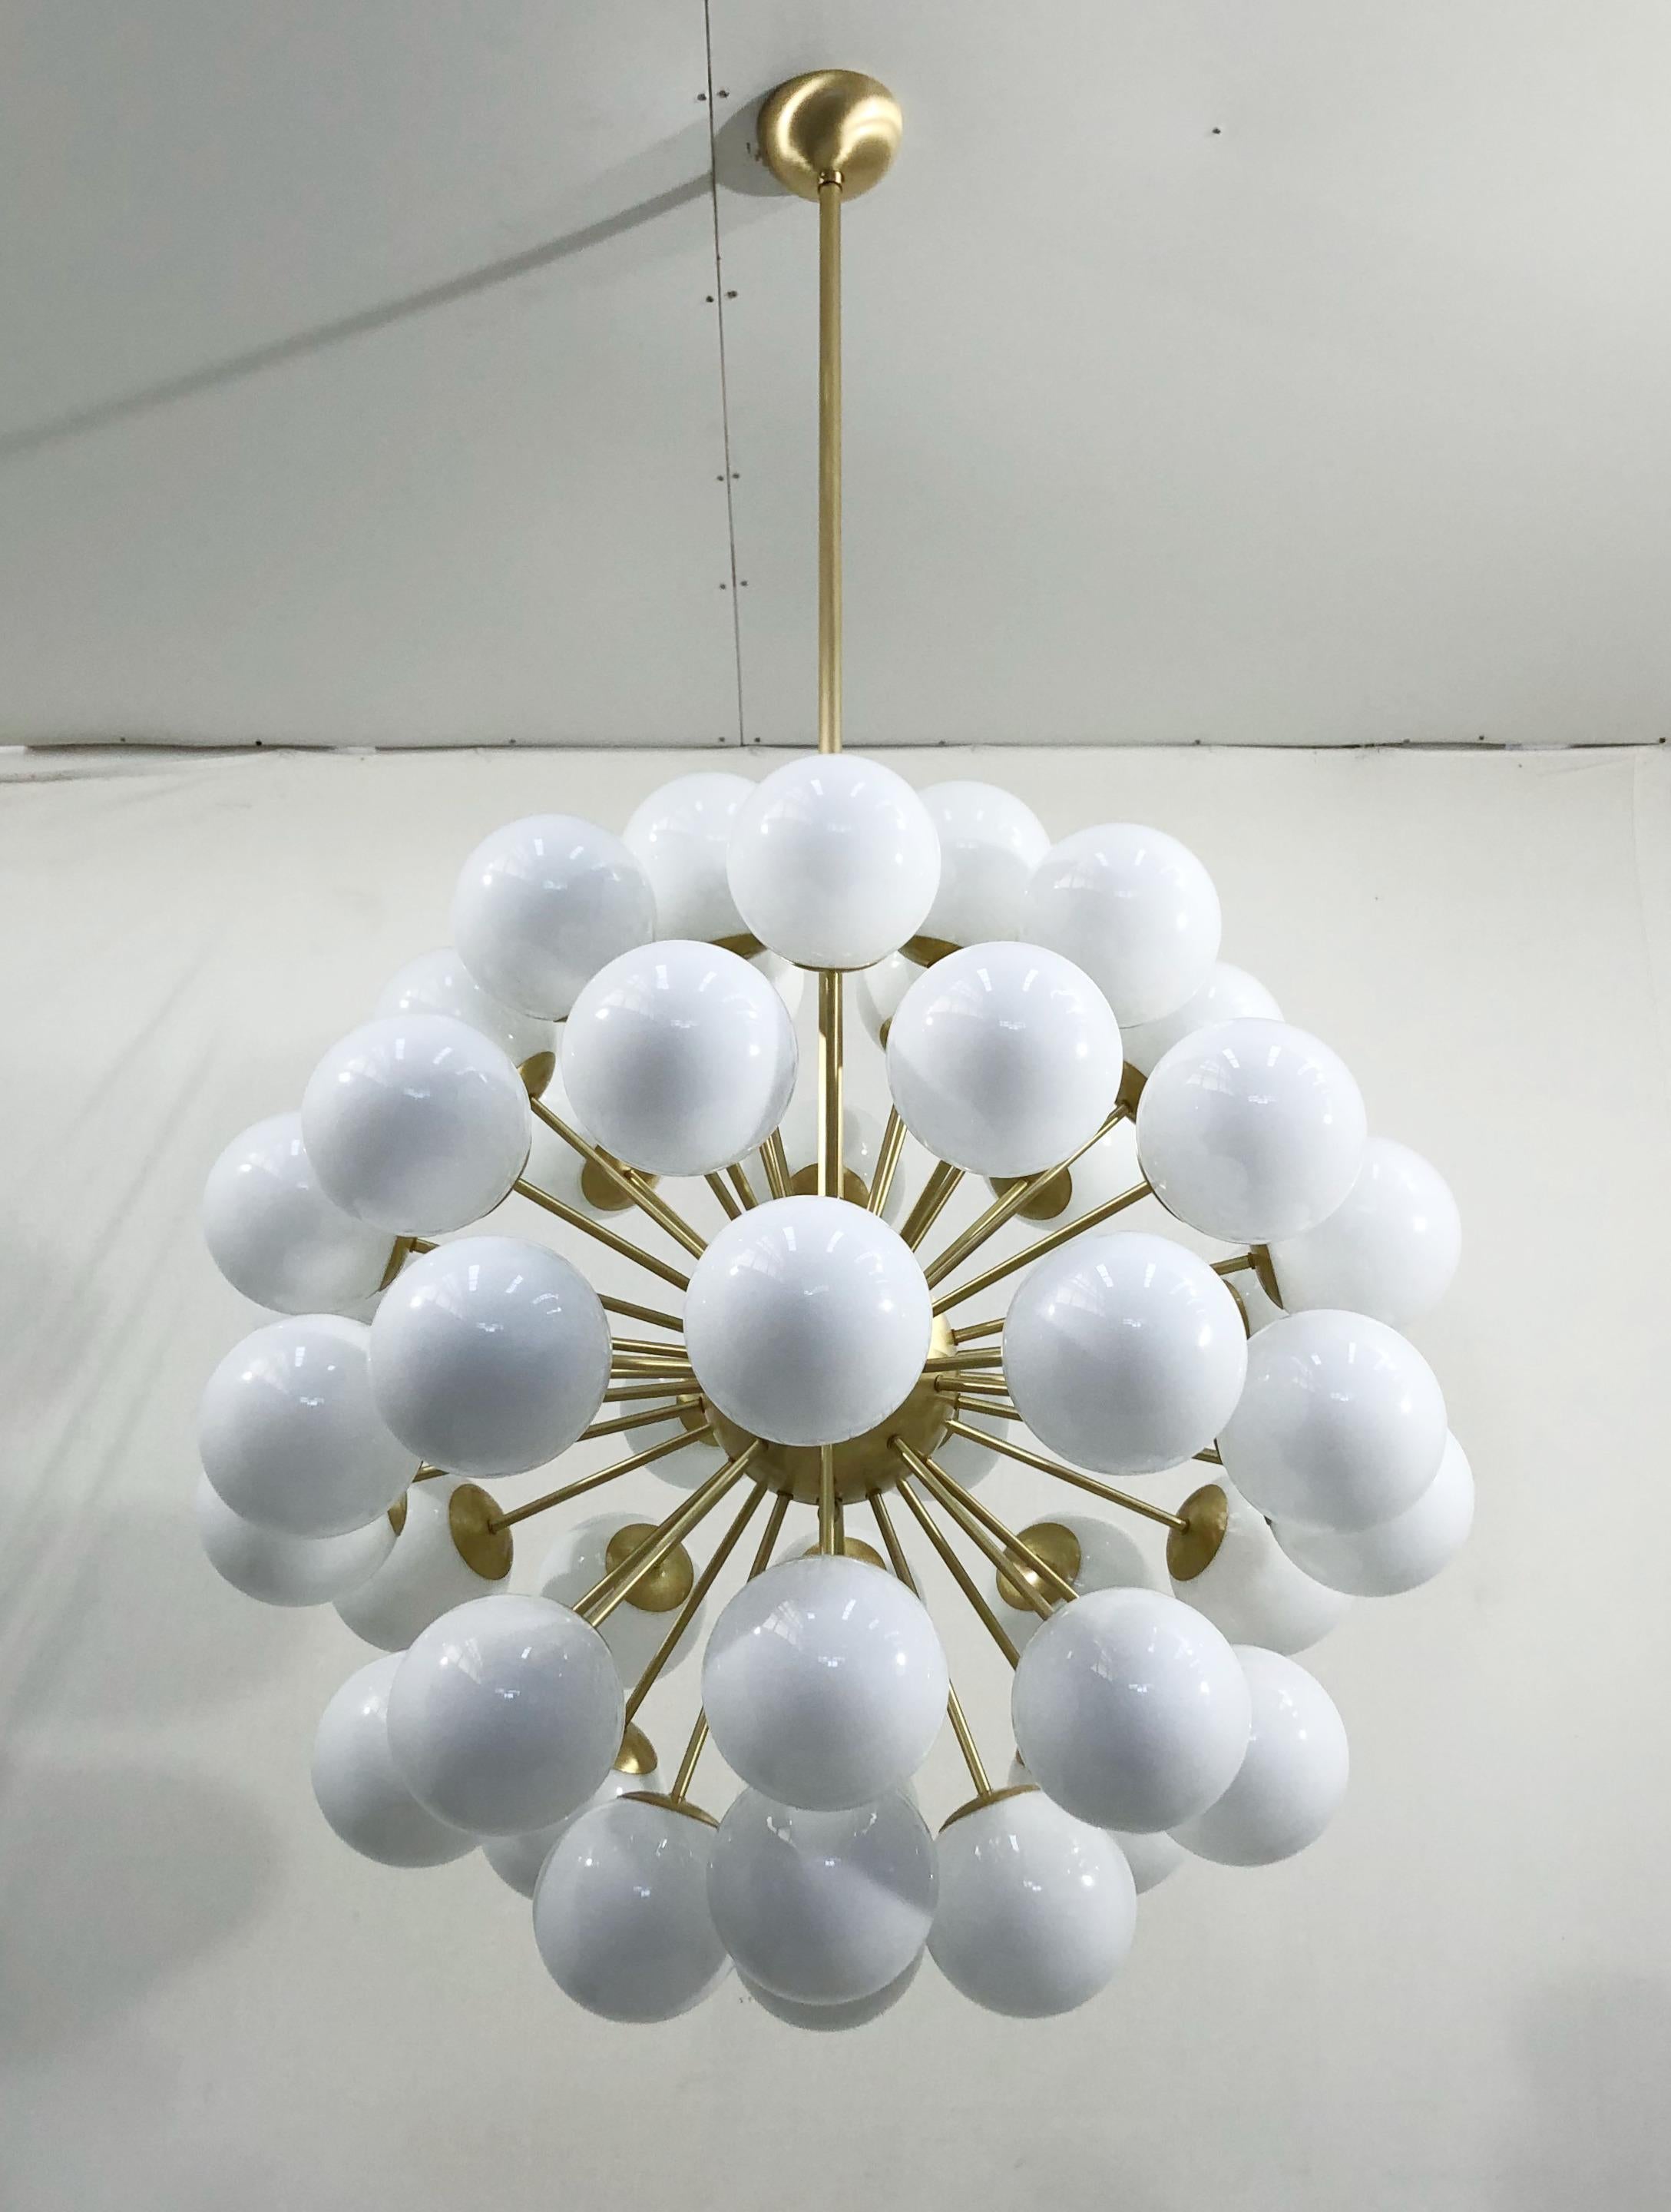 Italian sputnik chandelier with 48 Murano glass globes mounted on brass frame / Designed by Fabio Bergomi for Fabio Ltd / Made in Italy
48 lights / E12 or E14 type / max 40W each
Measures: diameter 38 inches / height 38 inches plus rod and